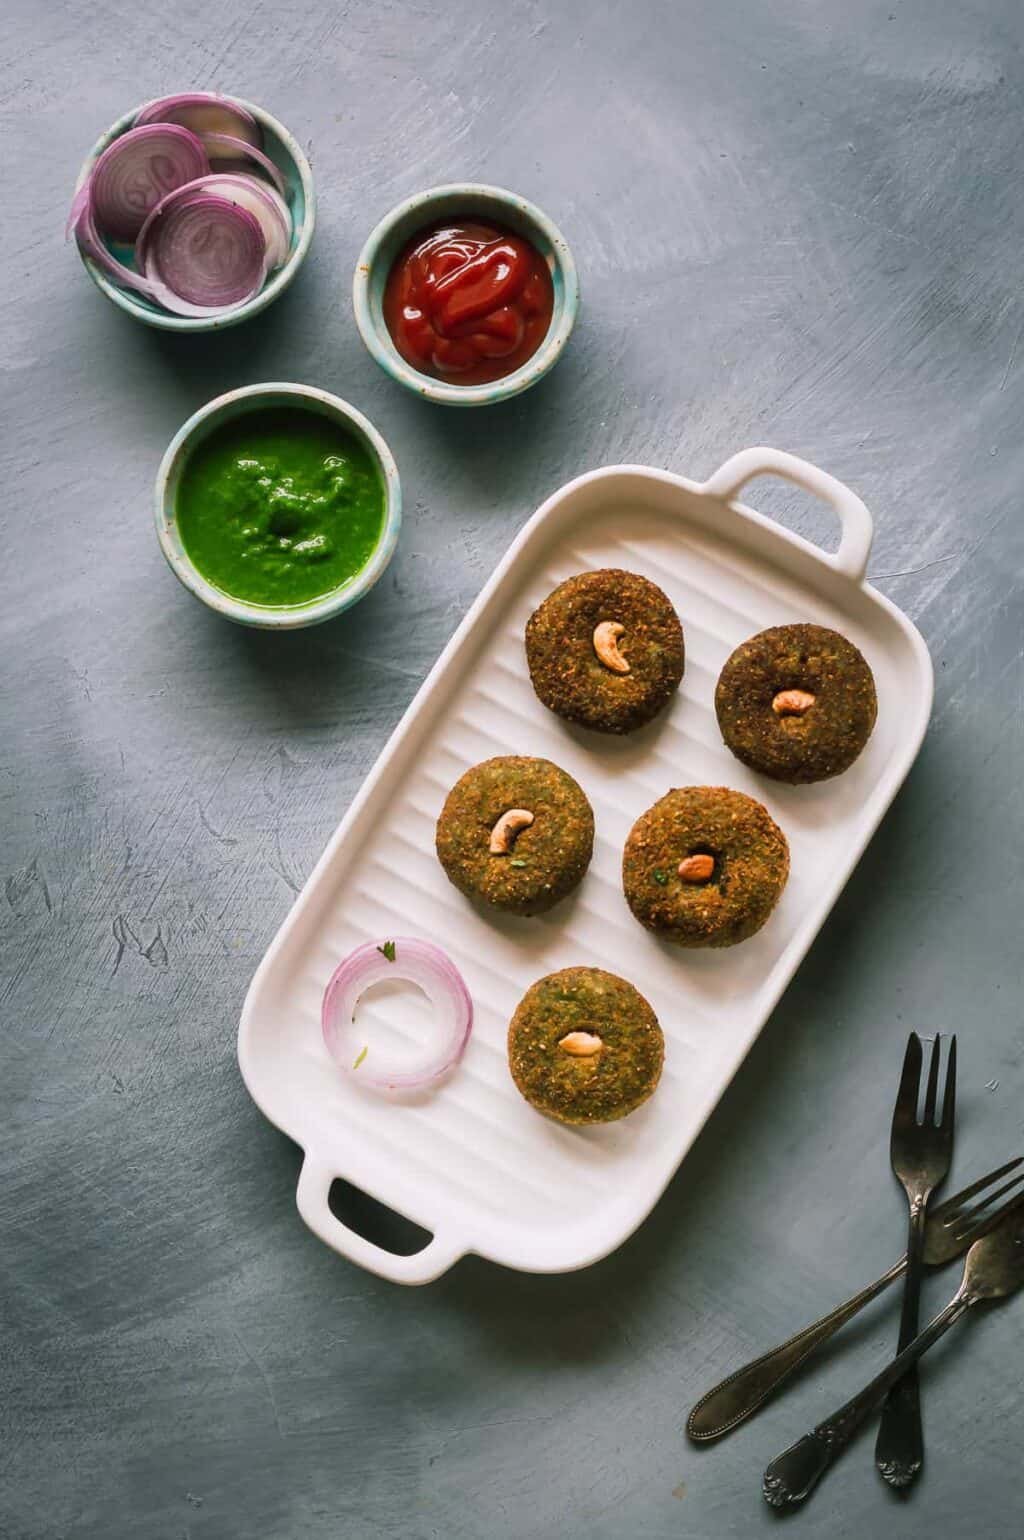 Hara bhara kabab are soft patties made with pureed spinach and peas. Serve them as appetisers or as an evening snack along with hot piping chai or tea. 